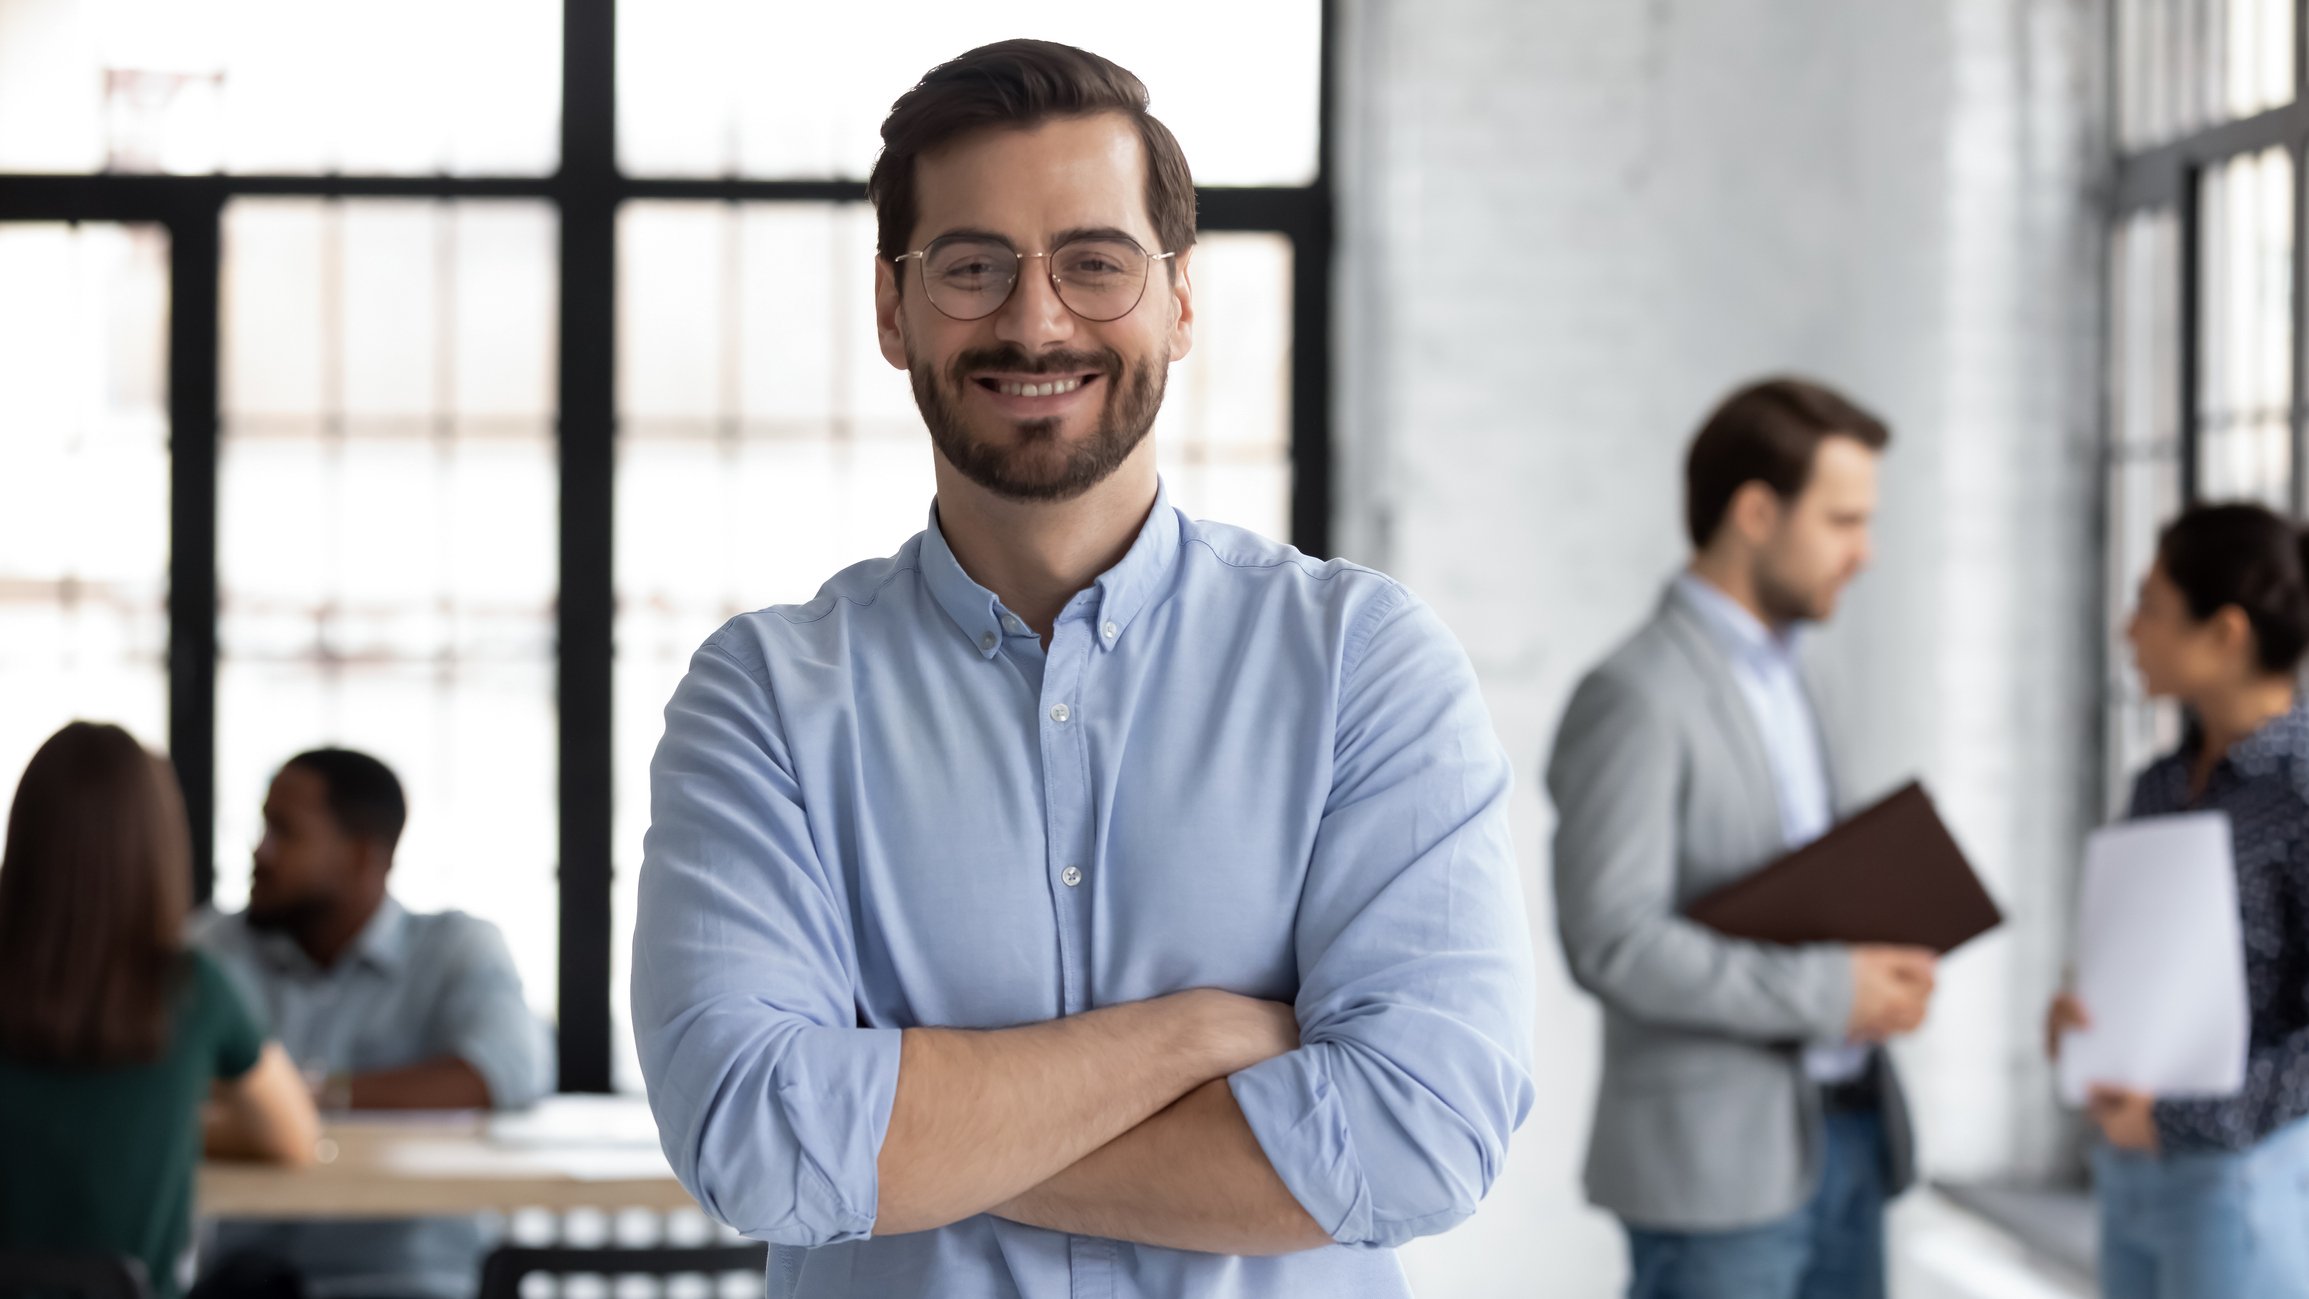 Smiling male CEO posing alone in modern office